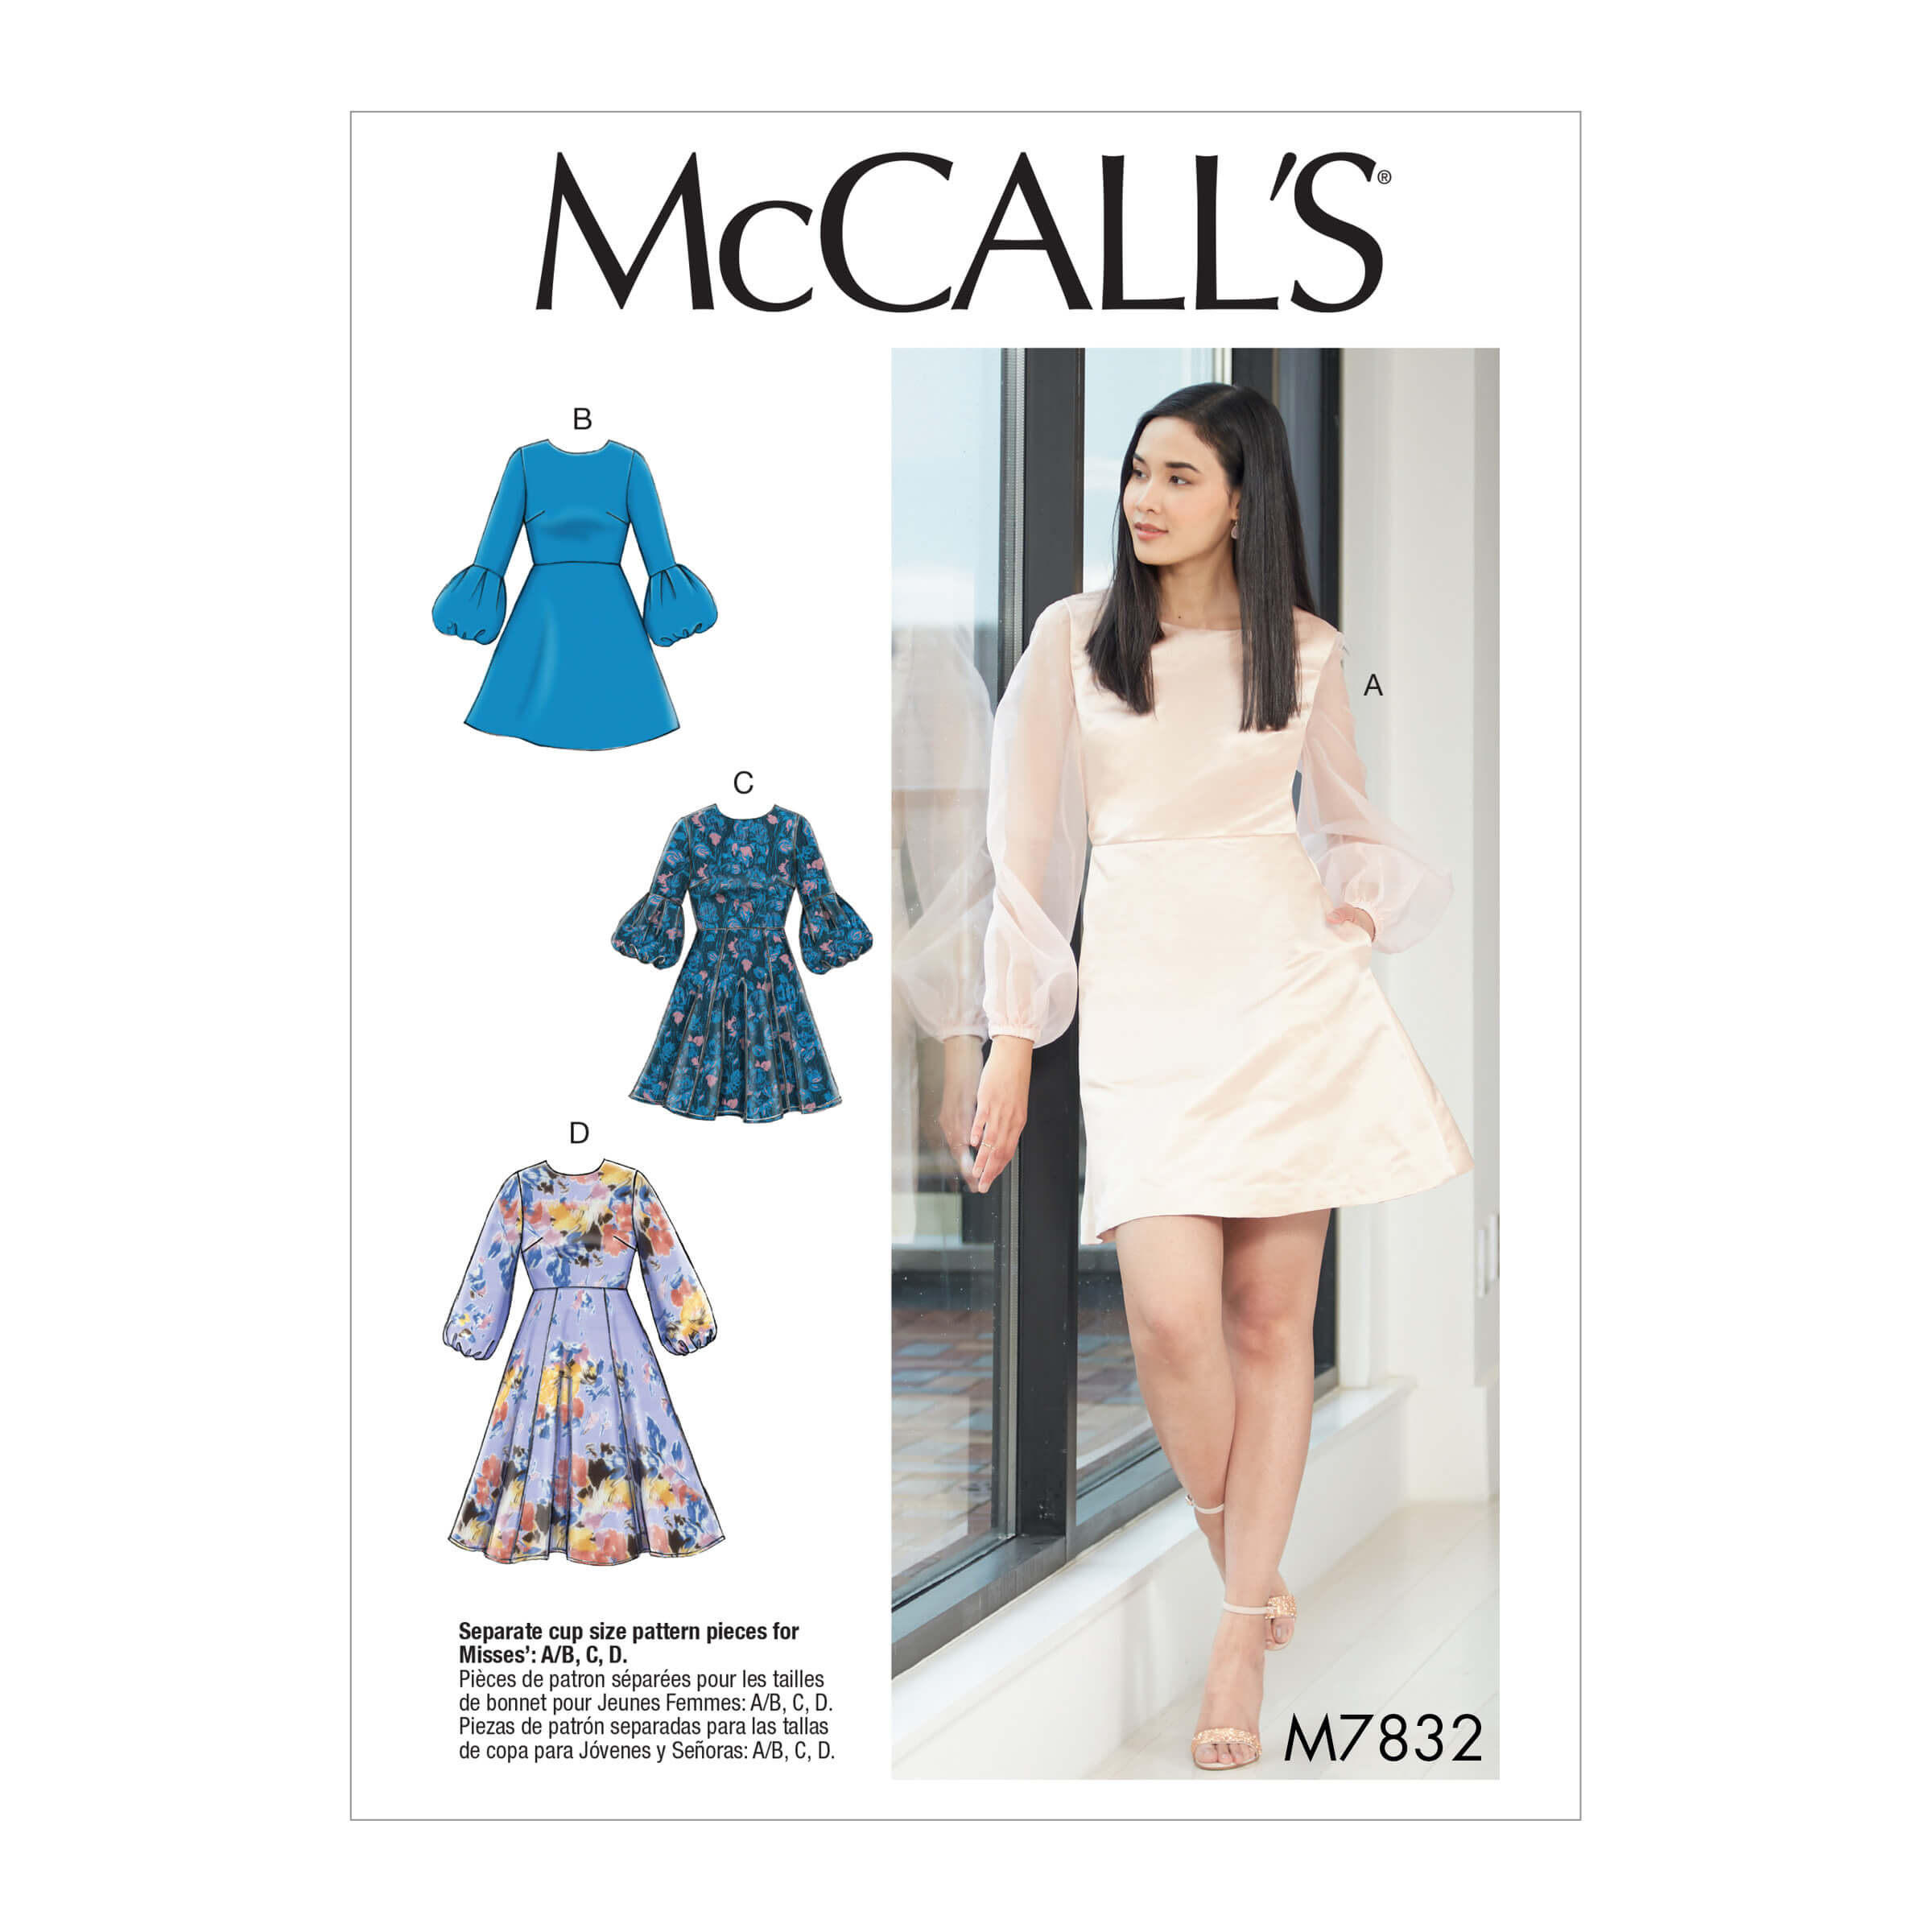 McCall's Sewing Pattern M7832 Misses' Dresses